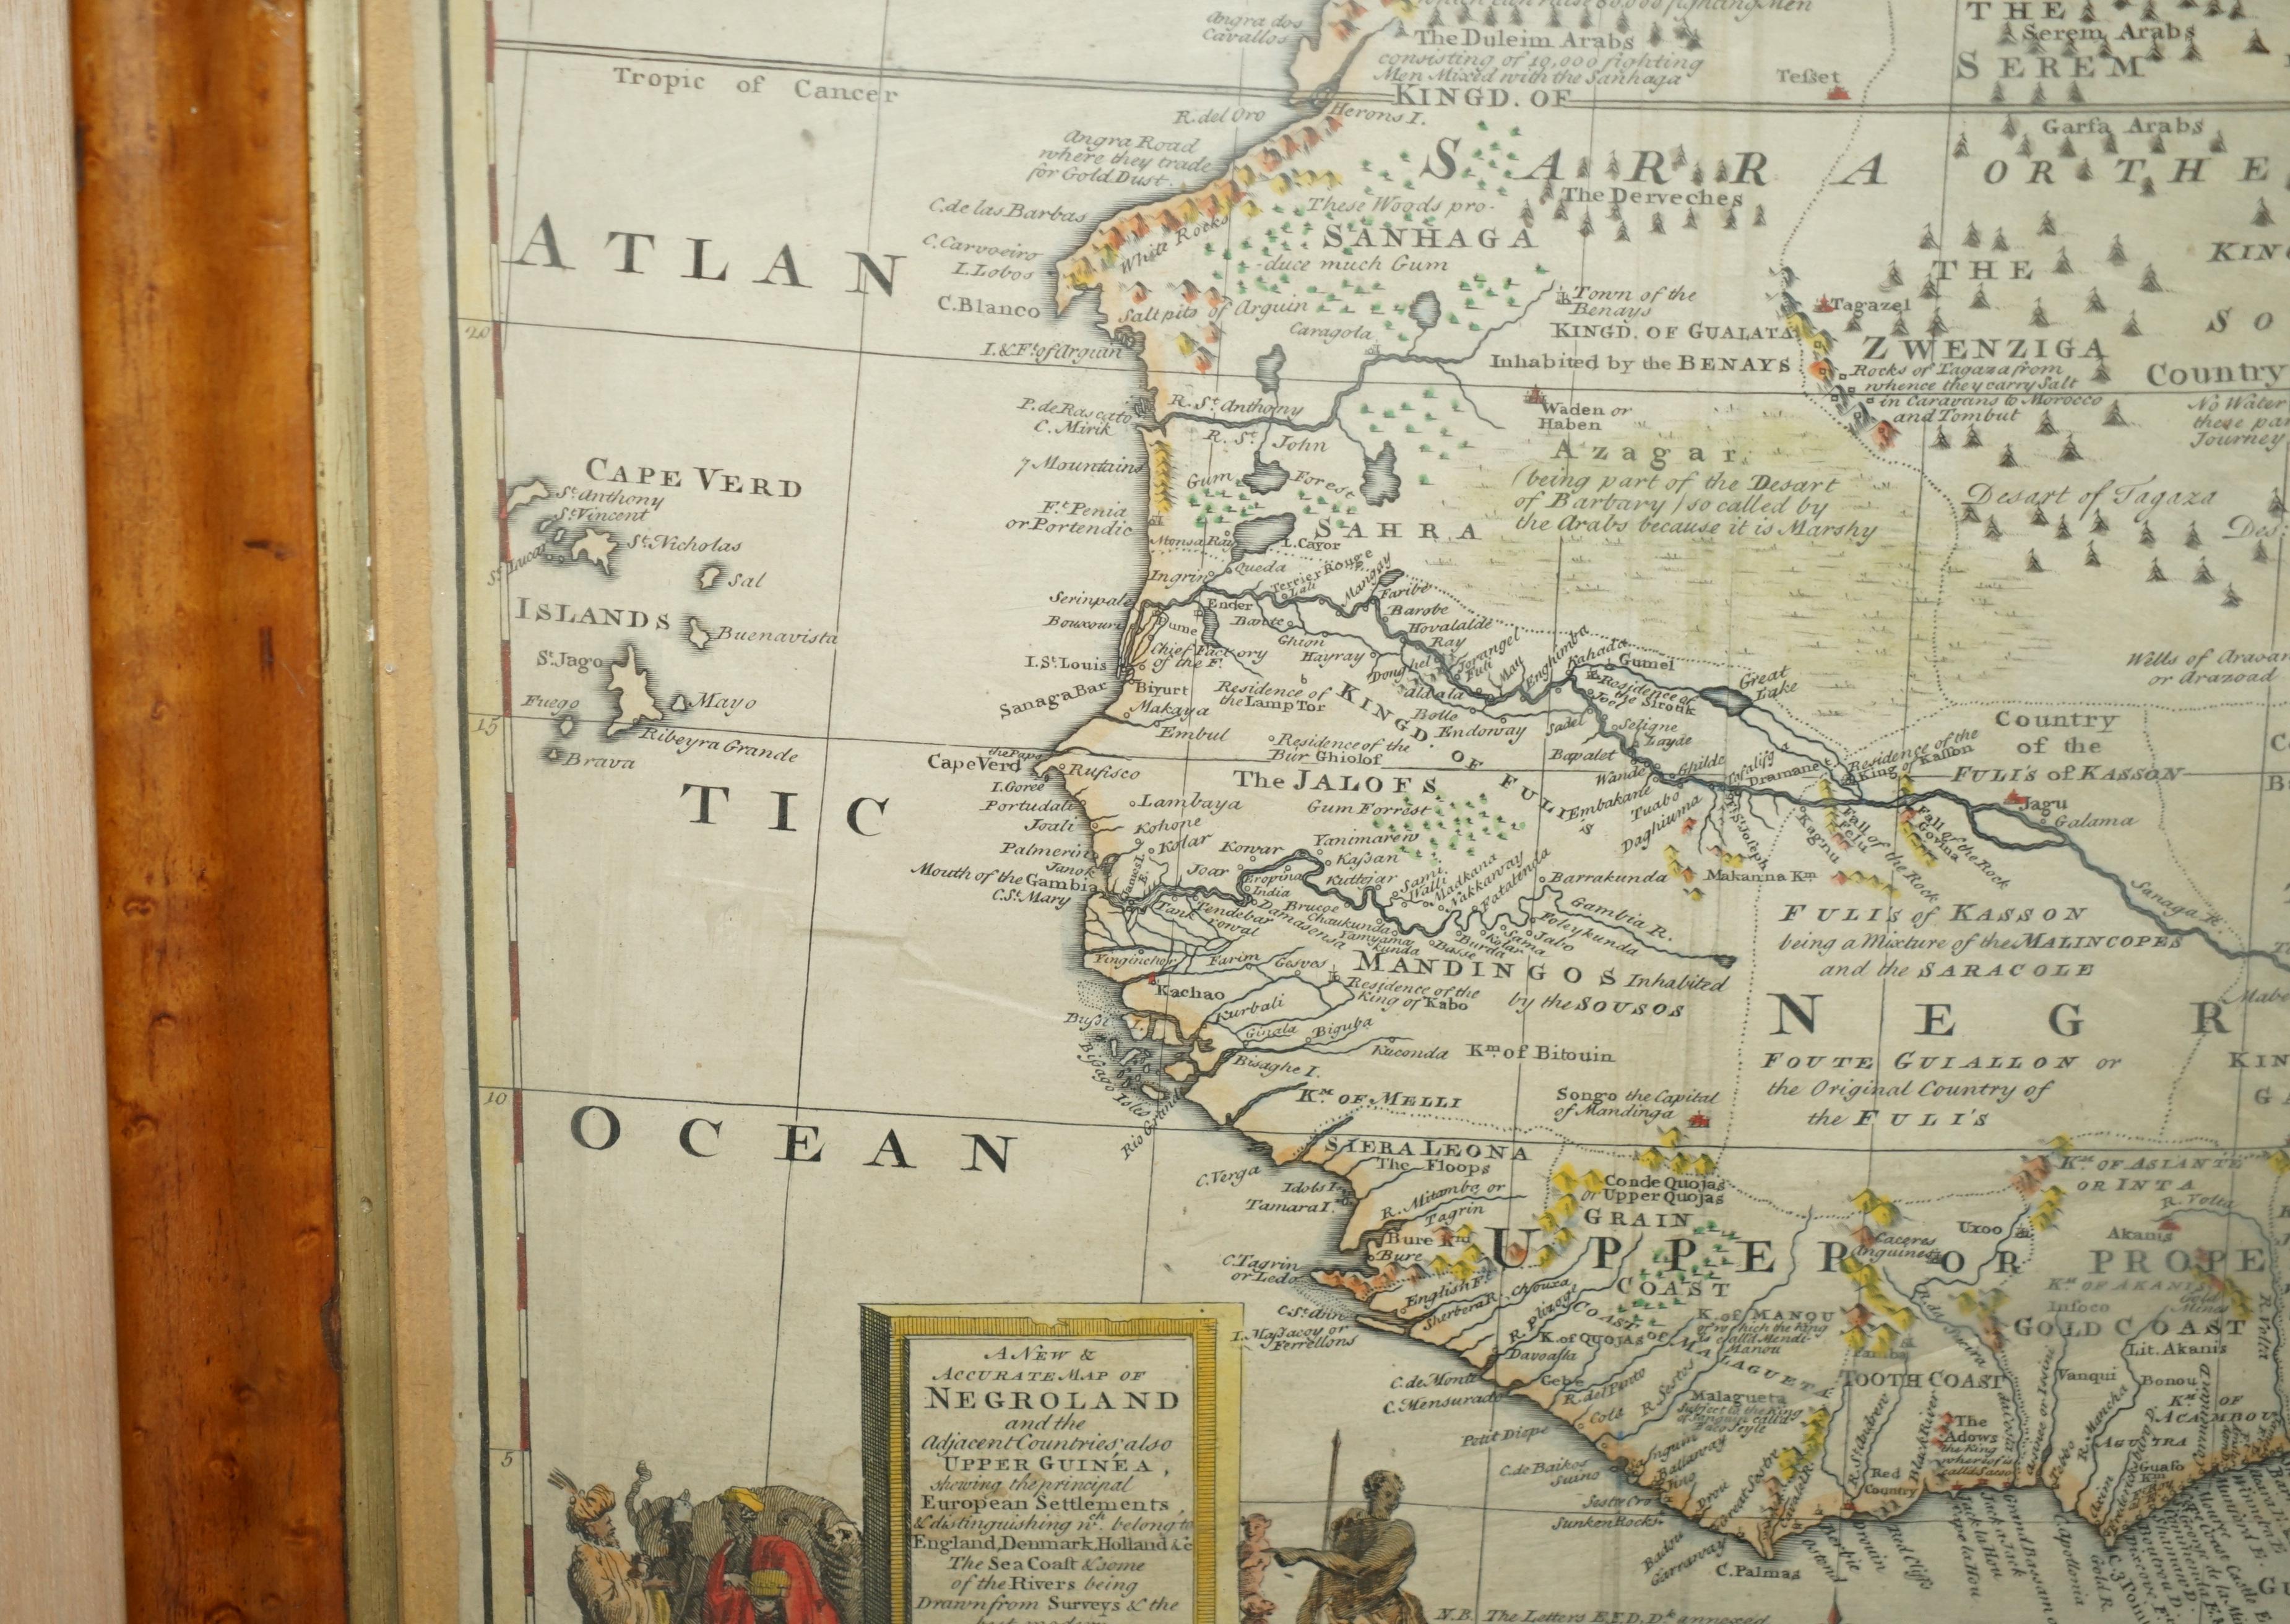 English 1747 British Map Showing the Kingdom of Judah on the West Coast of Africa